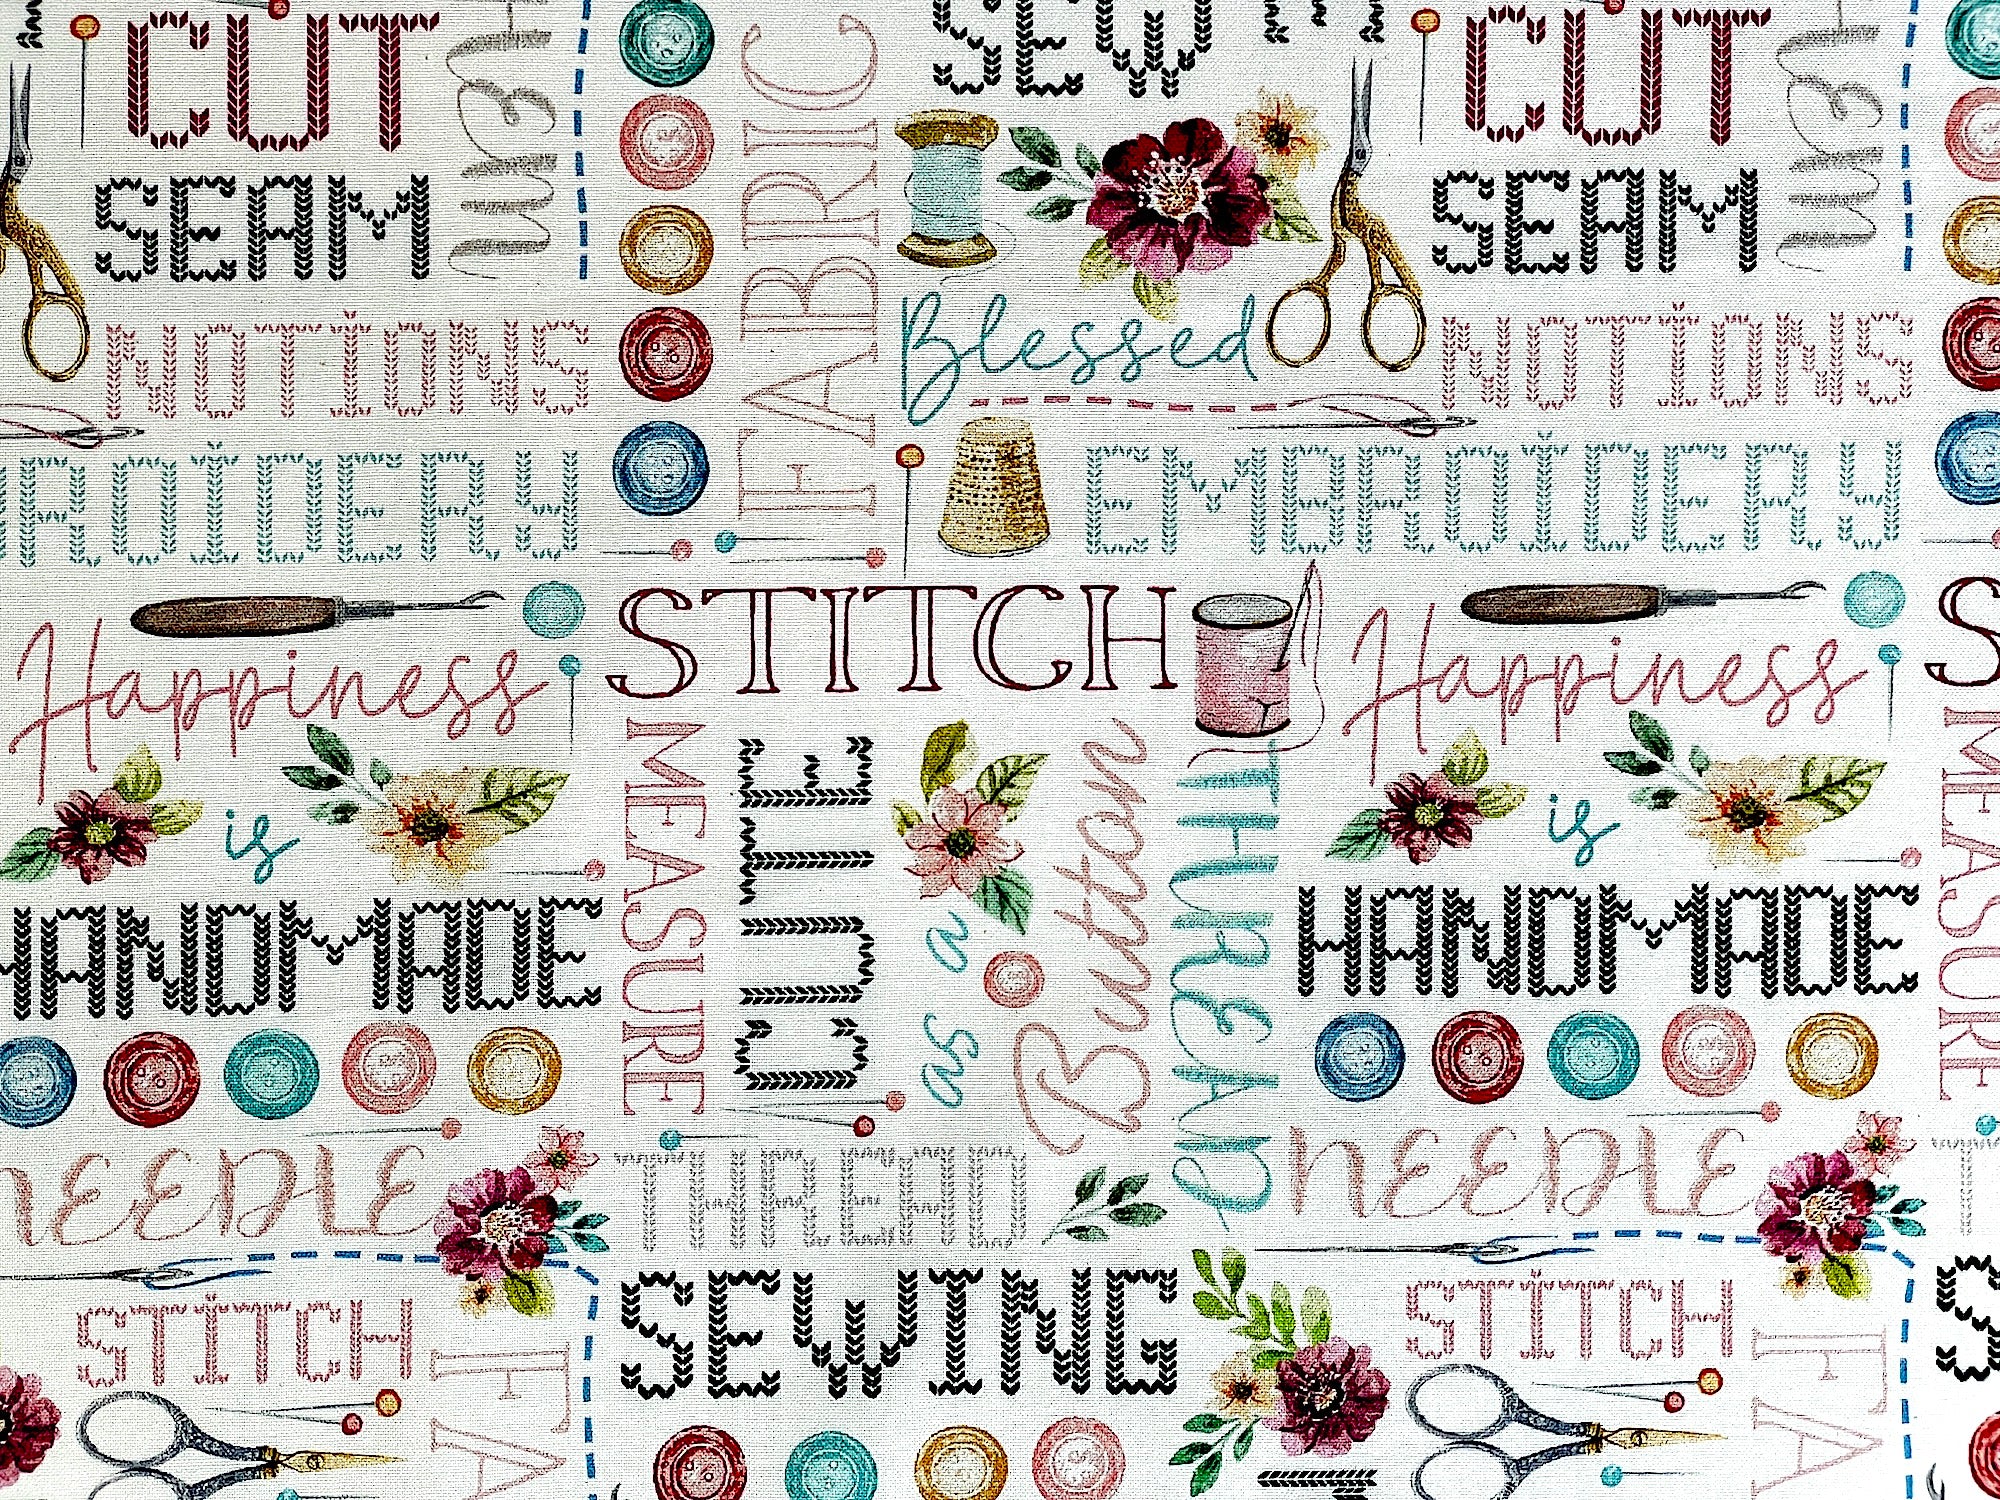 This fabric is part of the Sew in Love Collection by Rockstar Sewing.  This white cotton fabric is covered with sewing sayings such as sewing, cute, handmade, thread, buttons, embroidery and more.  You will also see buttons, seam rippers, and thread.